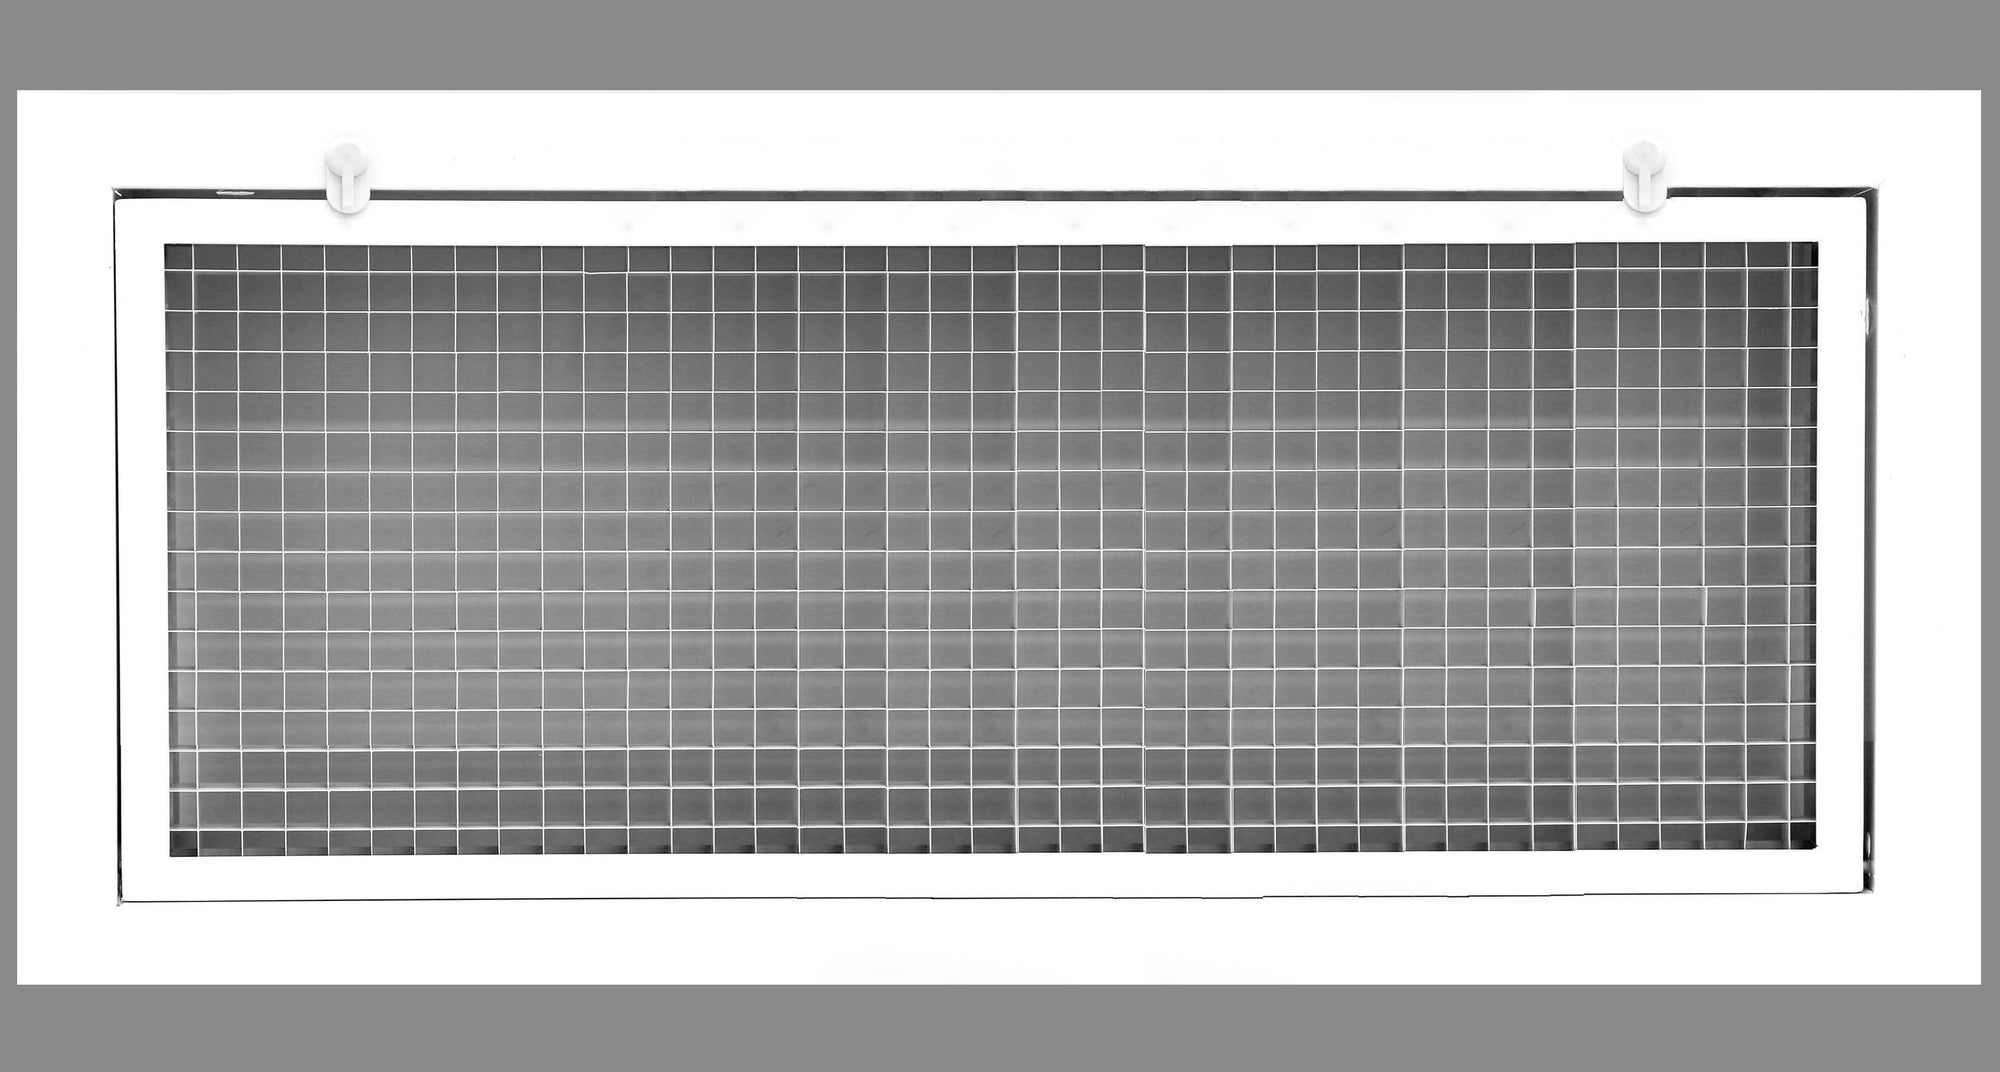 26" x 6" Cube Core Eggcrate Return Air Filter Grille for 1" Filter